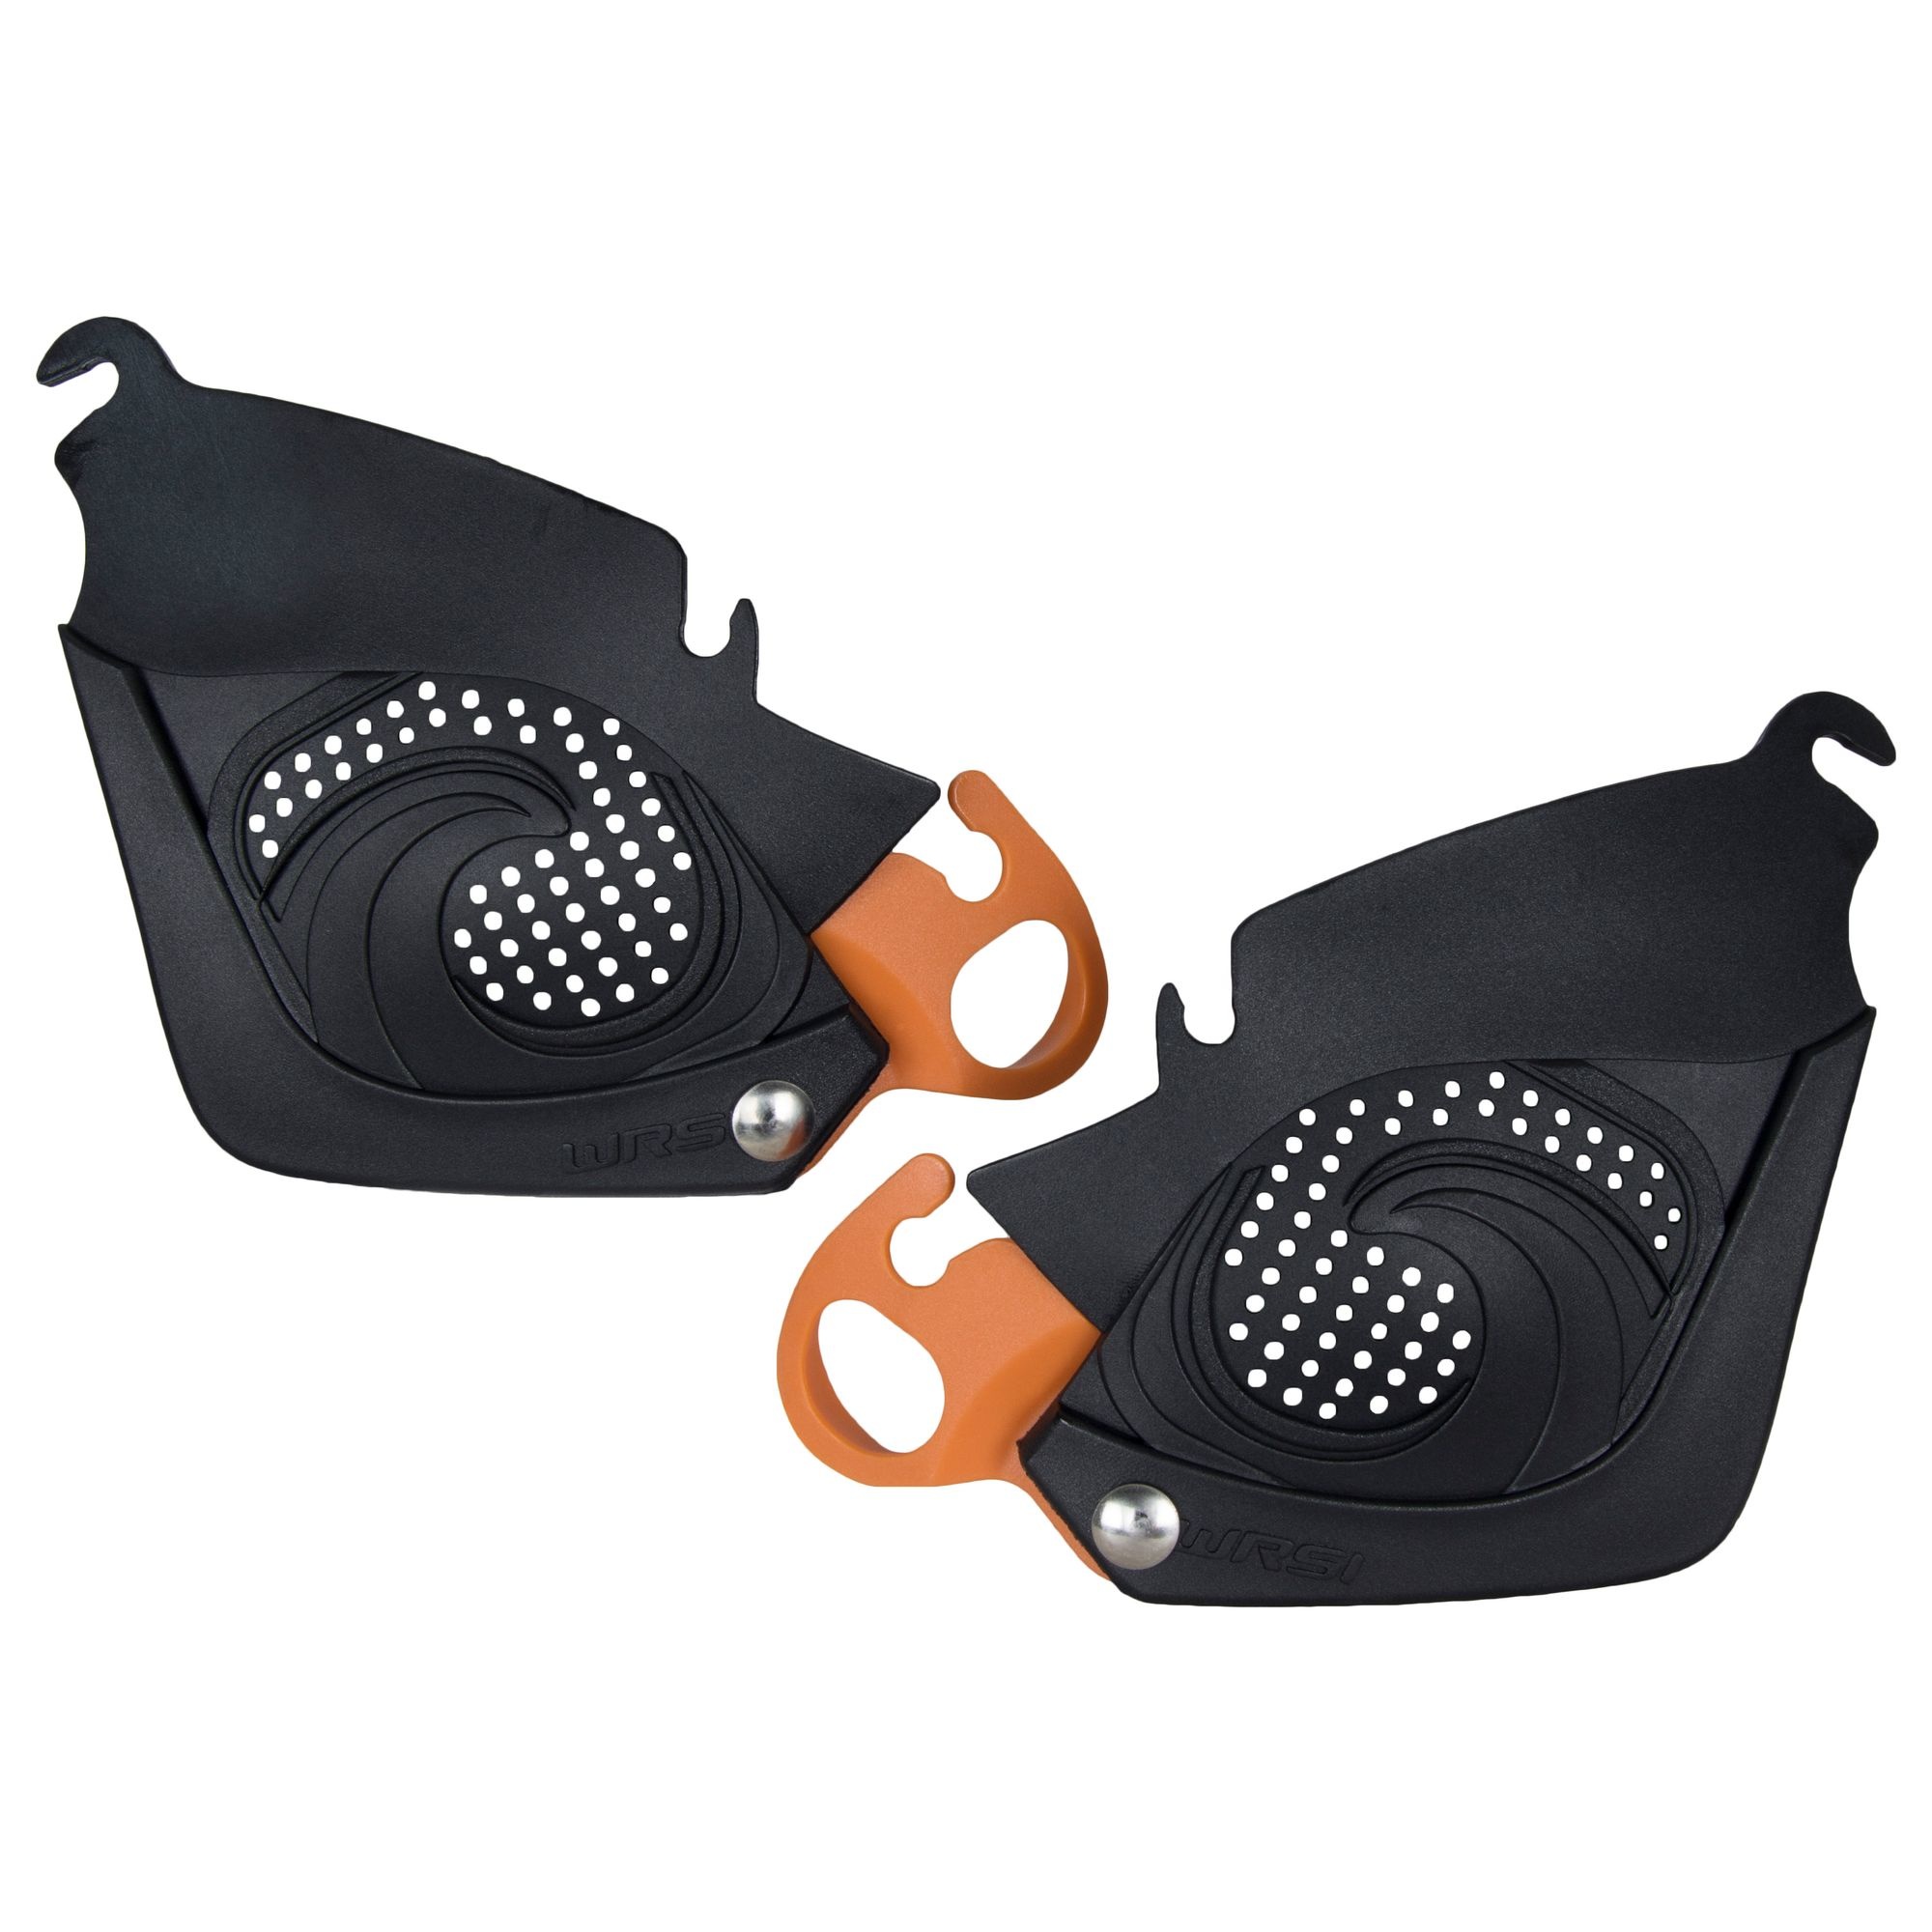 WRSI WRSI Ear Protection Attachment Pads Size M/L and L/XL